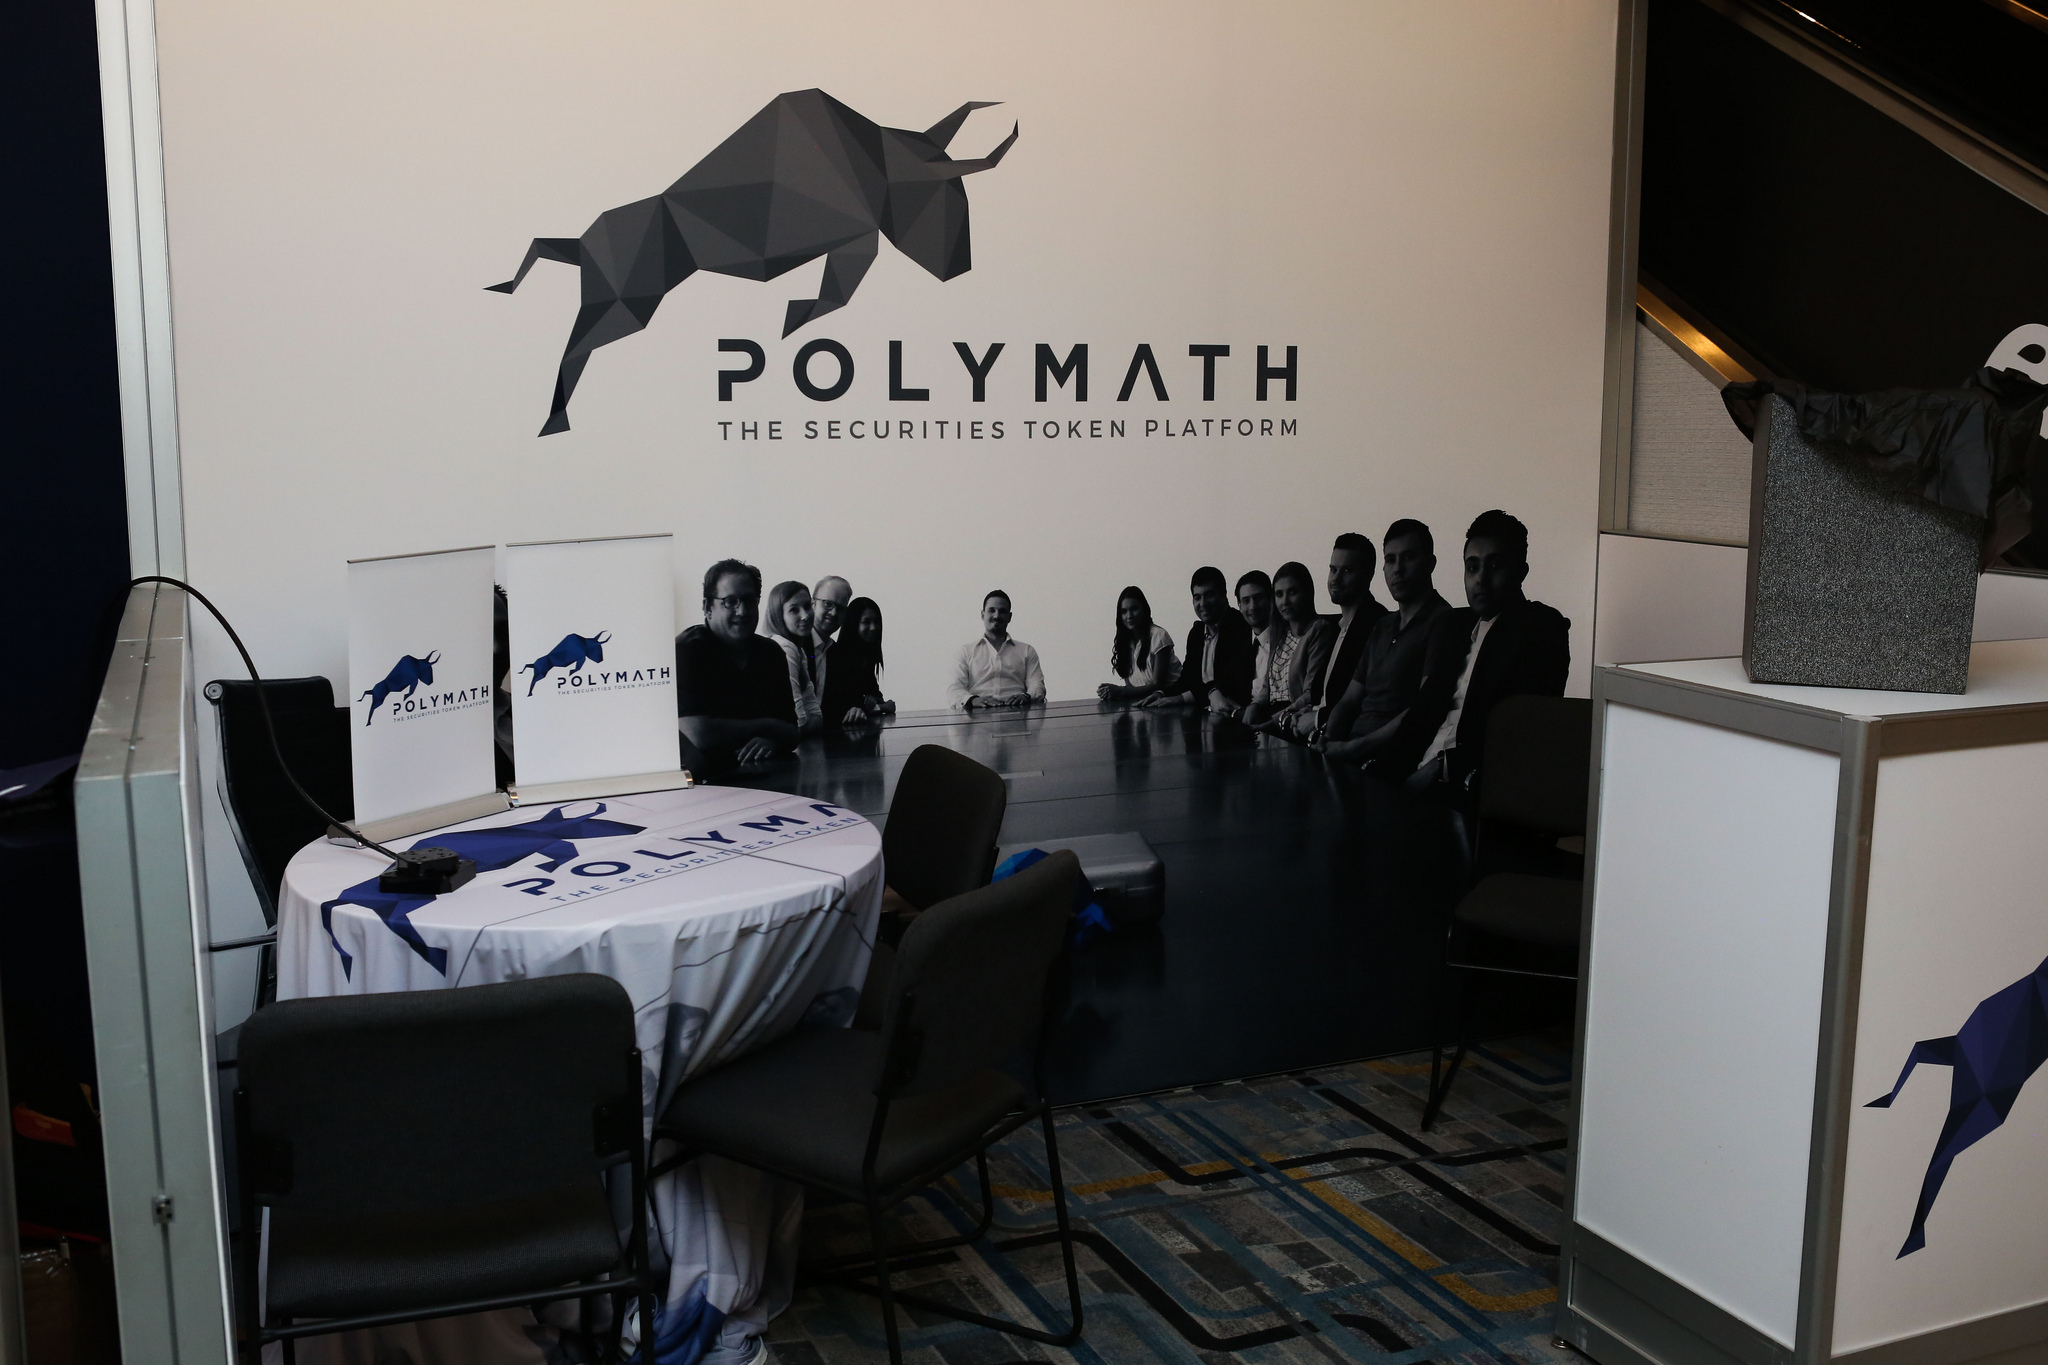 Polymath, SeriesOne Team Up To Simplify Security Token Issuance